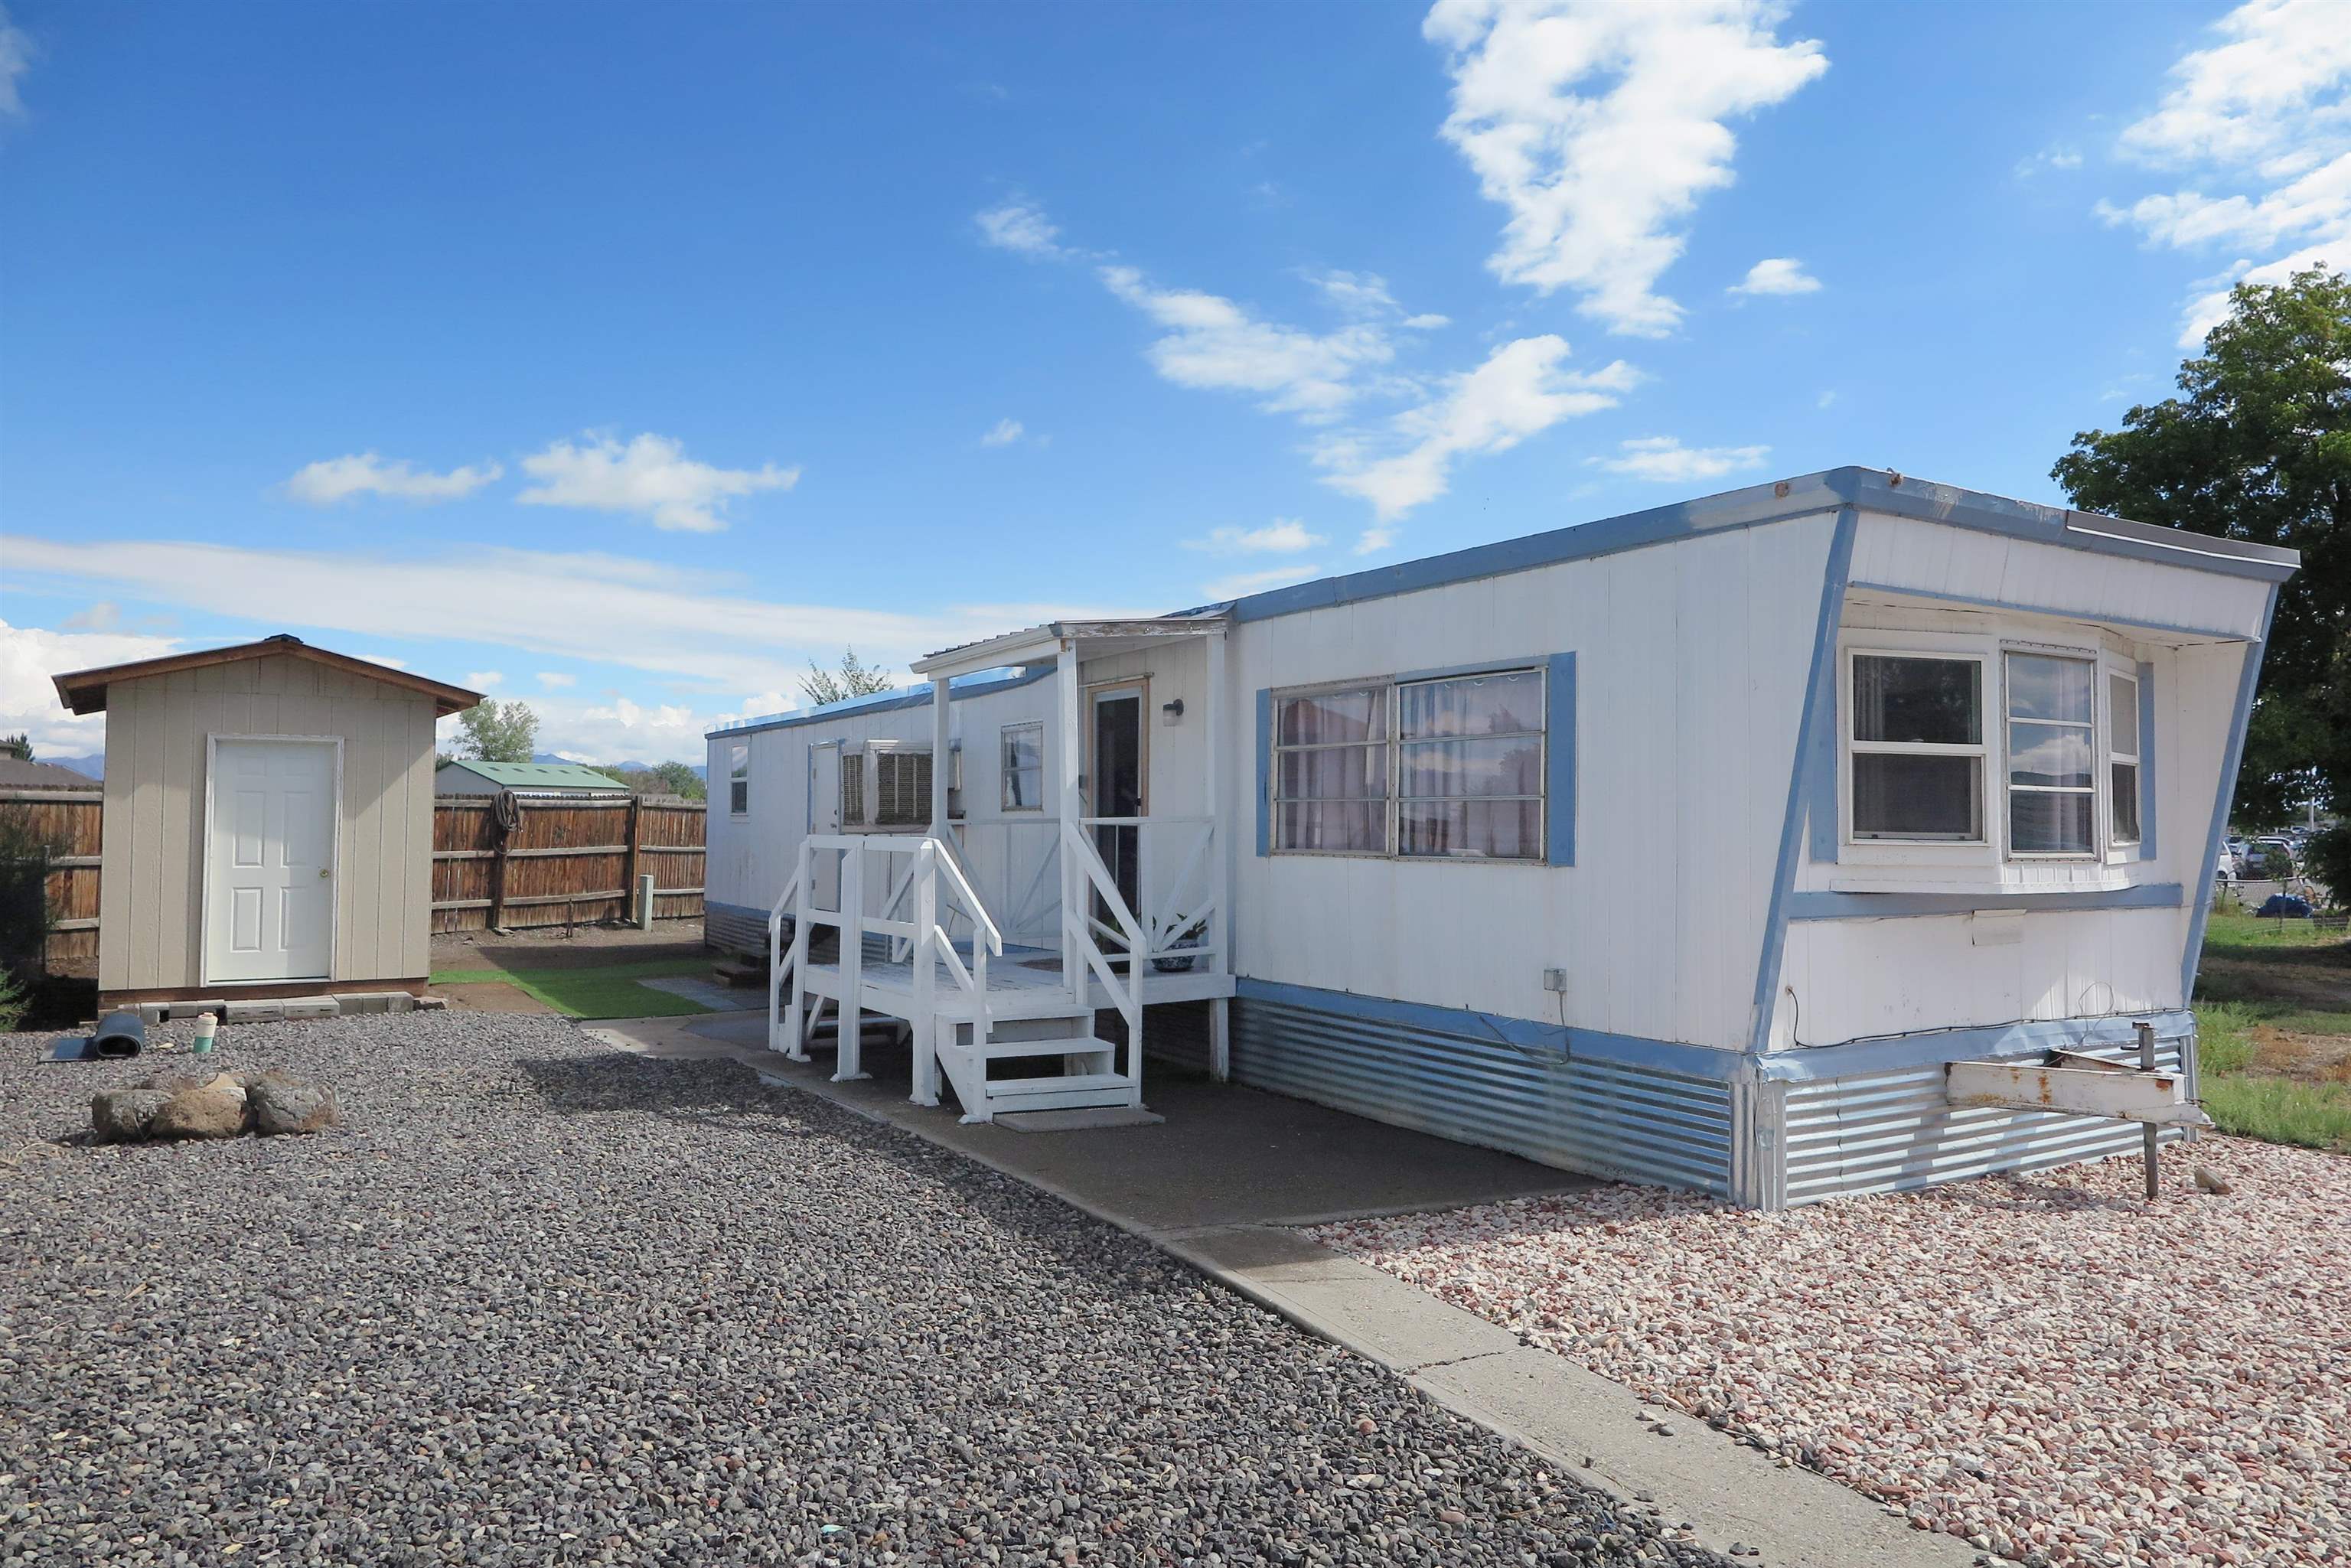 Cute and remodeled mobile home in convenient Fruita location. Lots of recent updates include re-sealing of entire roof, fresh paint and flooring, almost new appliances, and lighting. The 2nd bedroom was converted in to an office/laundry room and there is also a large storage shed. The kitchen boasts new cabinets and countertop plus all appliances are included with the sale.The evaporative cooler was just serviced and the furnace is only a few years old. Some windows in the home were also updated.